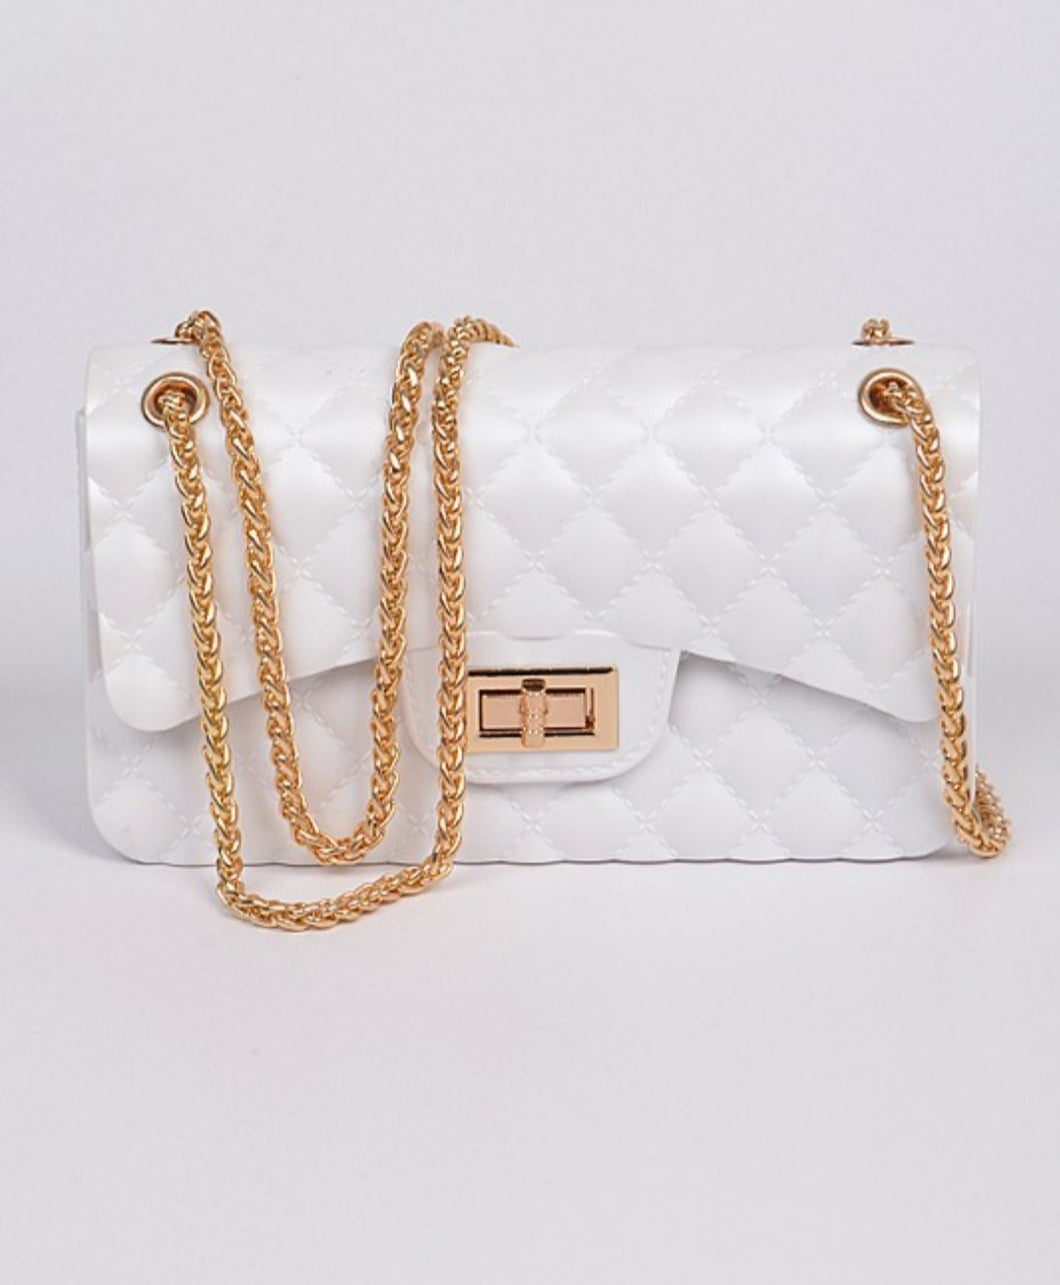 White Jelly Classic Bag